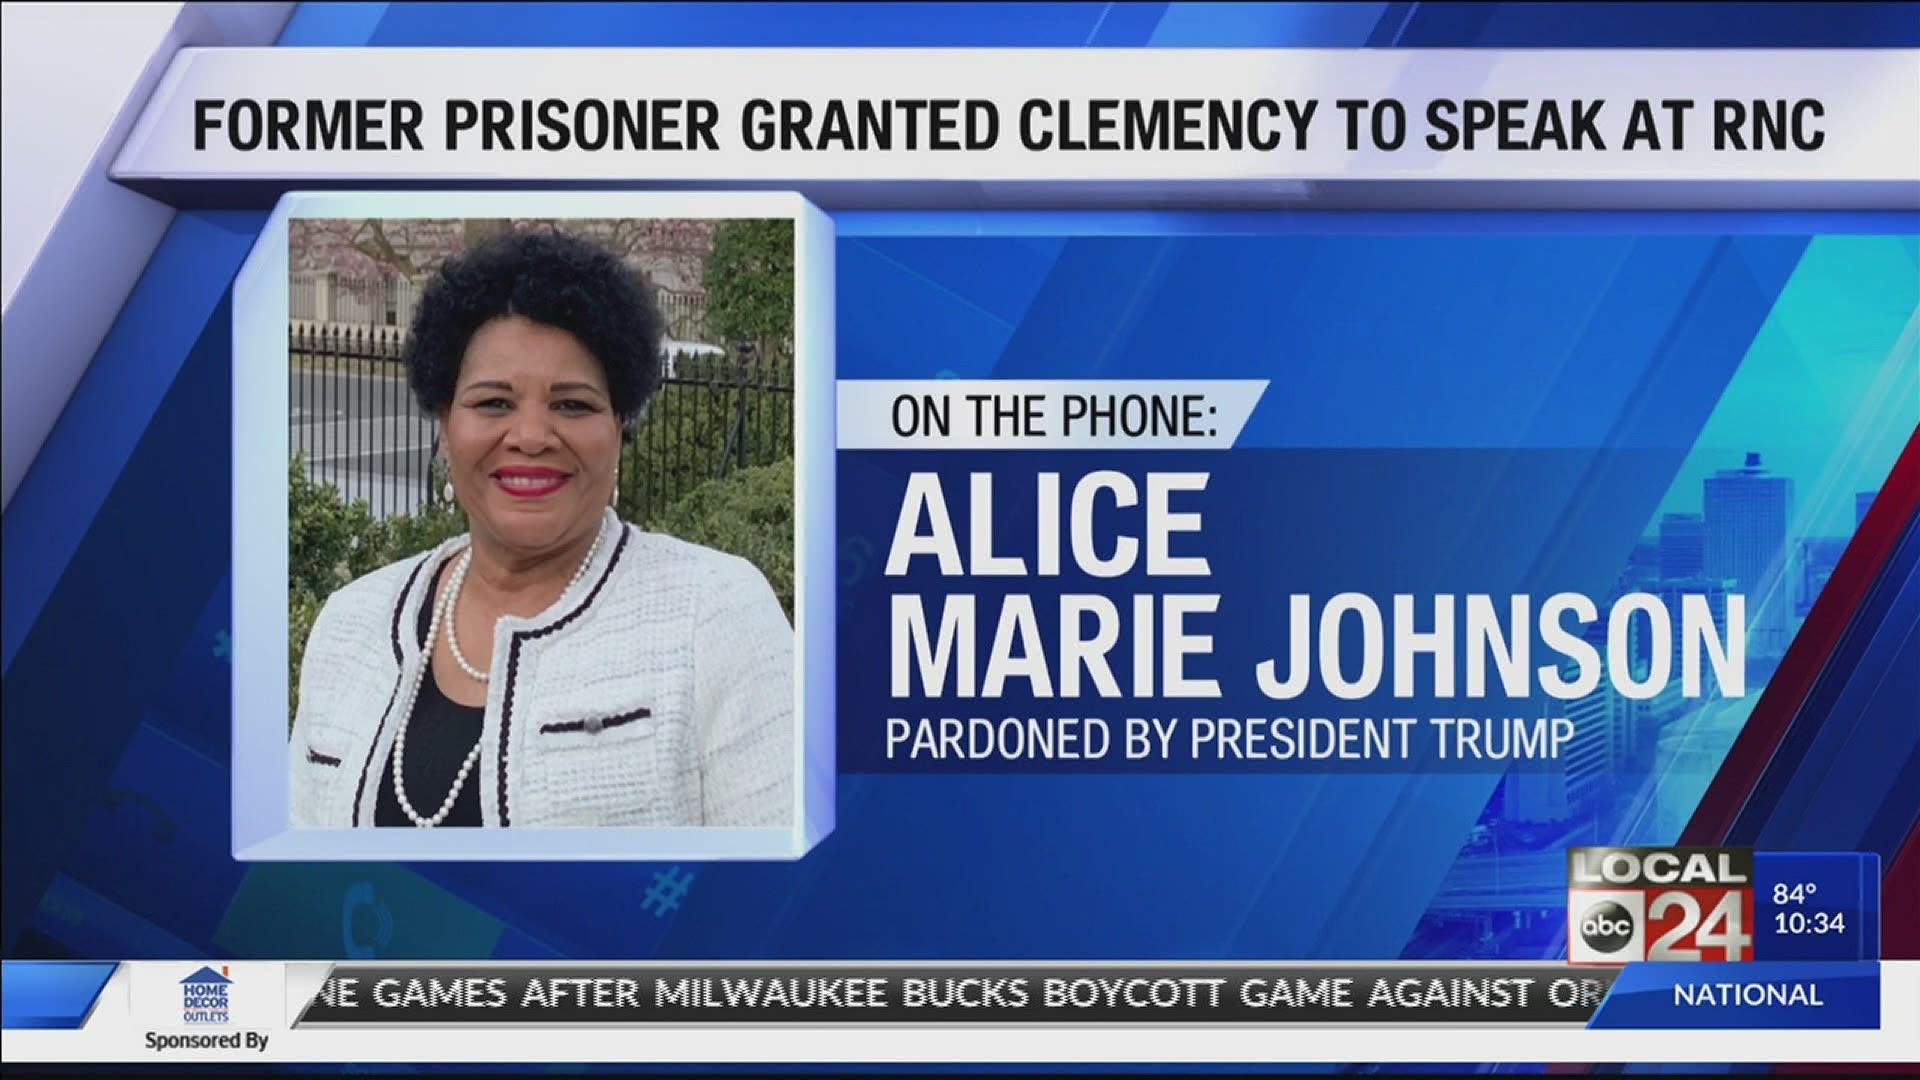 Johnson, who was granted Clemency by President Trump in 2018 will share her story and speak about criminal justice reform in the Rose Garden.